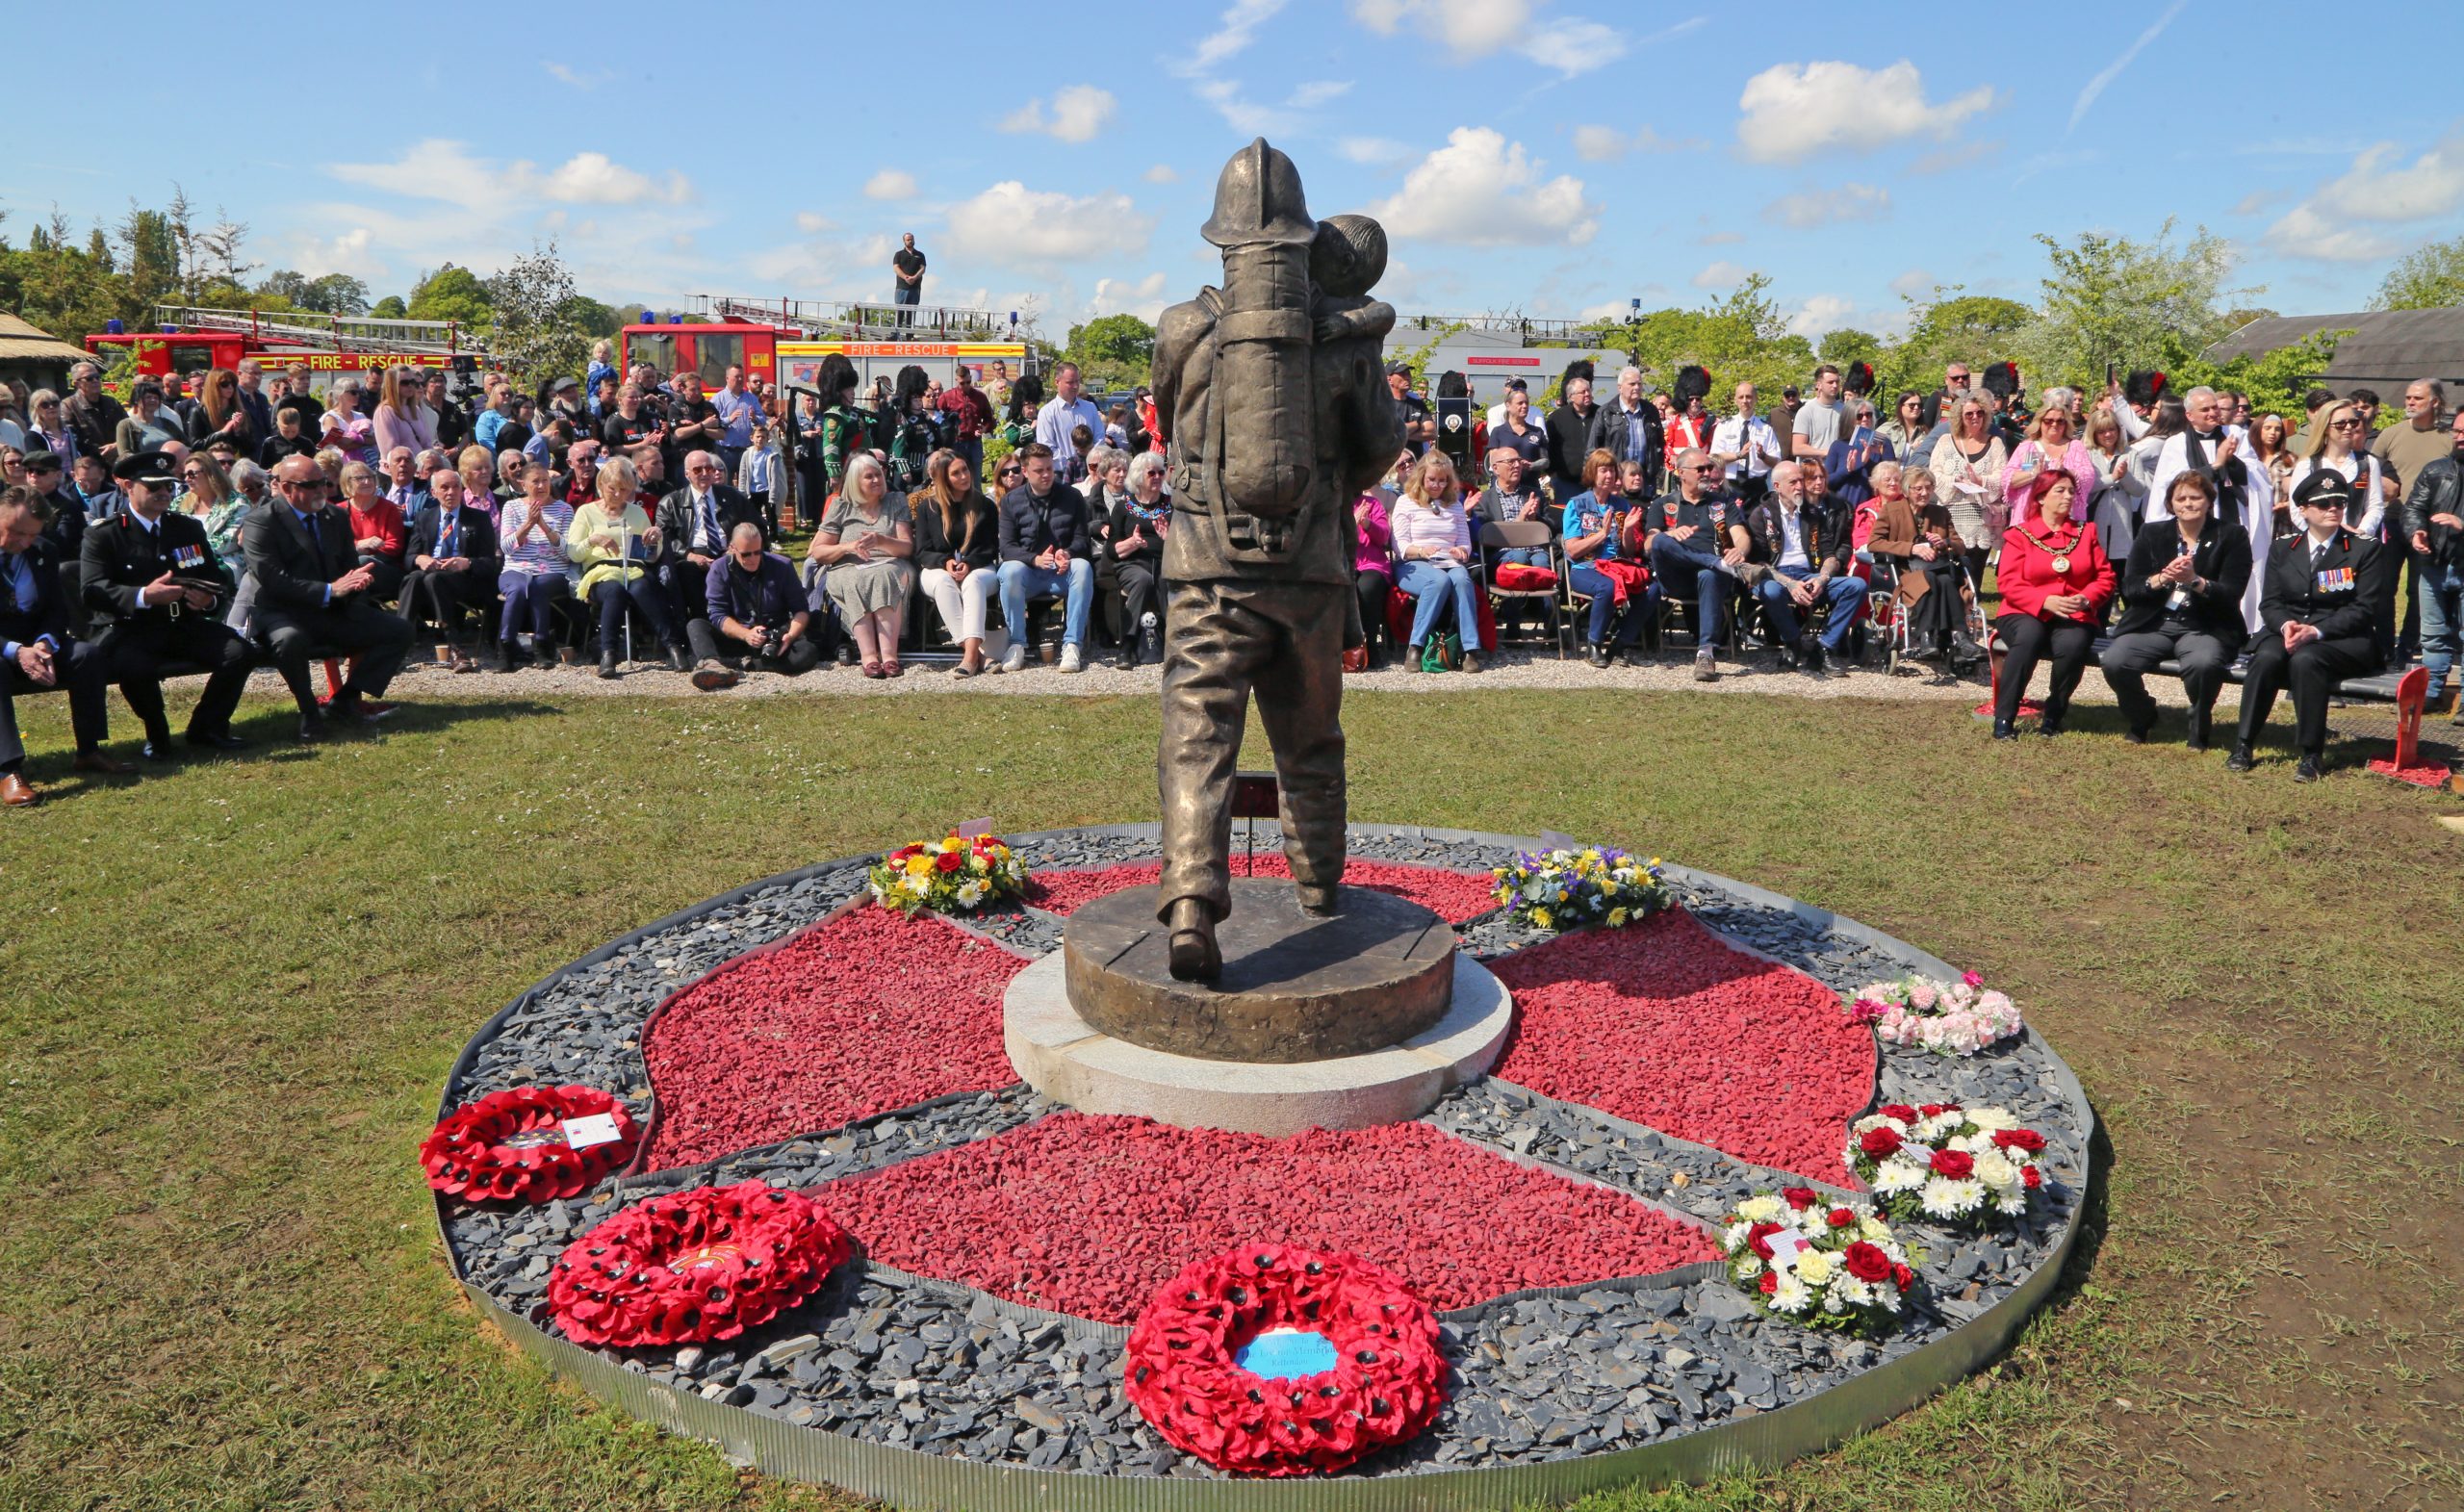 New Nationwide Fire Service Memorial Inaugurated in Essex With High Level Ceremony